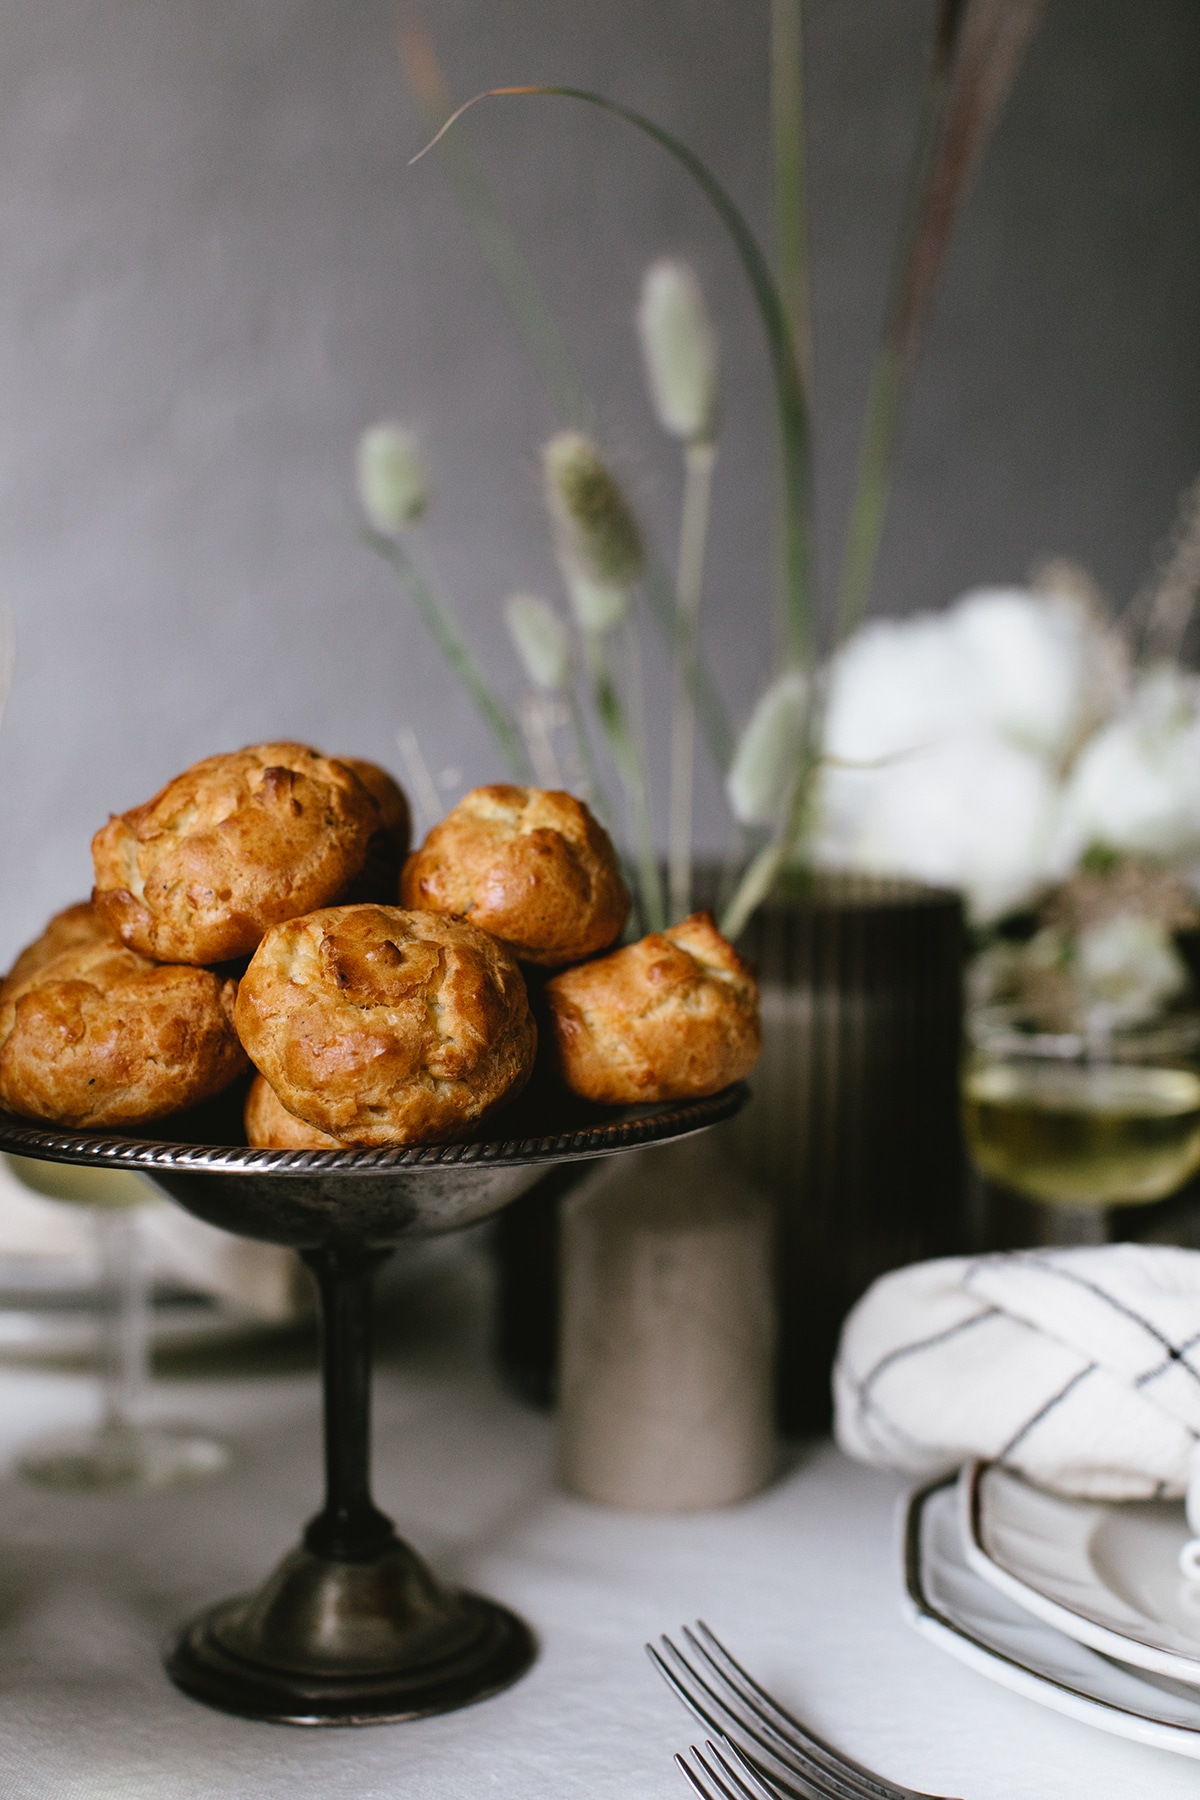 gruyere gougeres recipe - savory french puff pastry